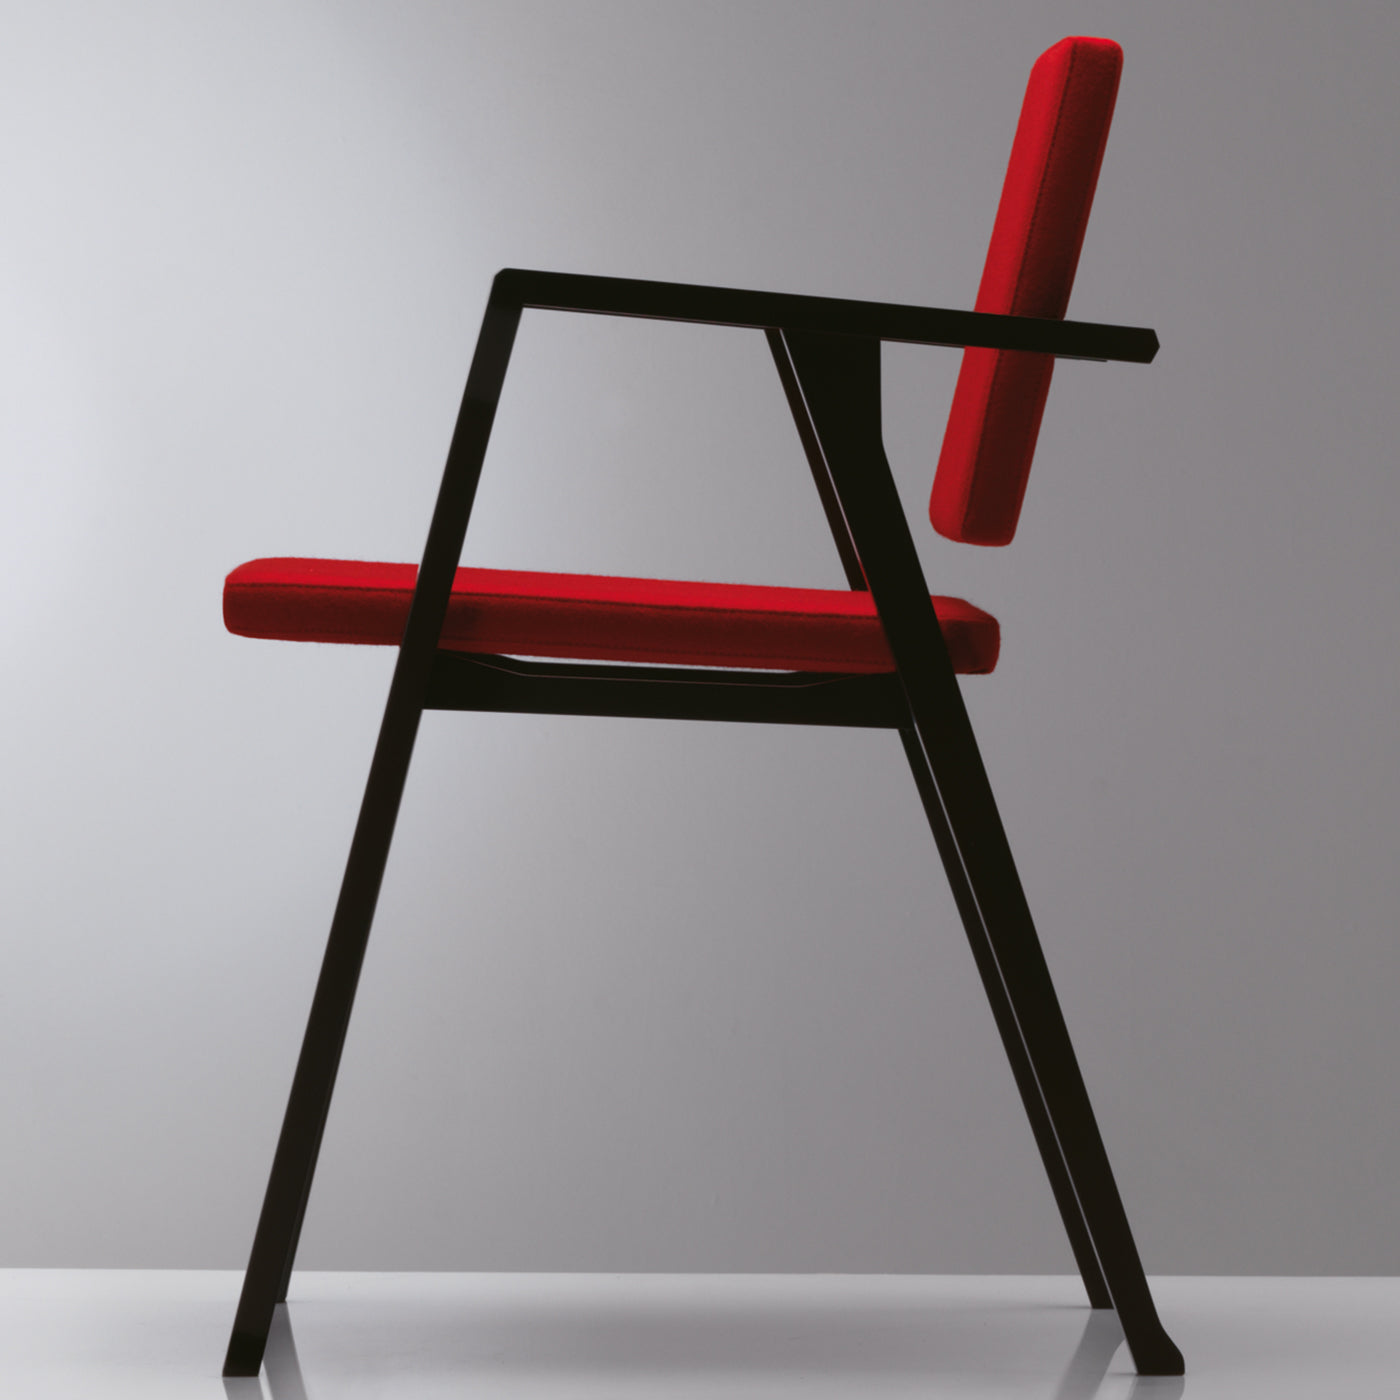 Luisa by Franco Albini - Black Ashwood & Red Upholstery  - Alternative view 1